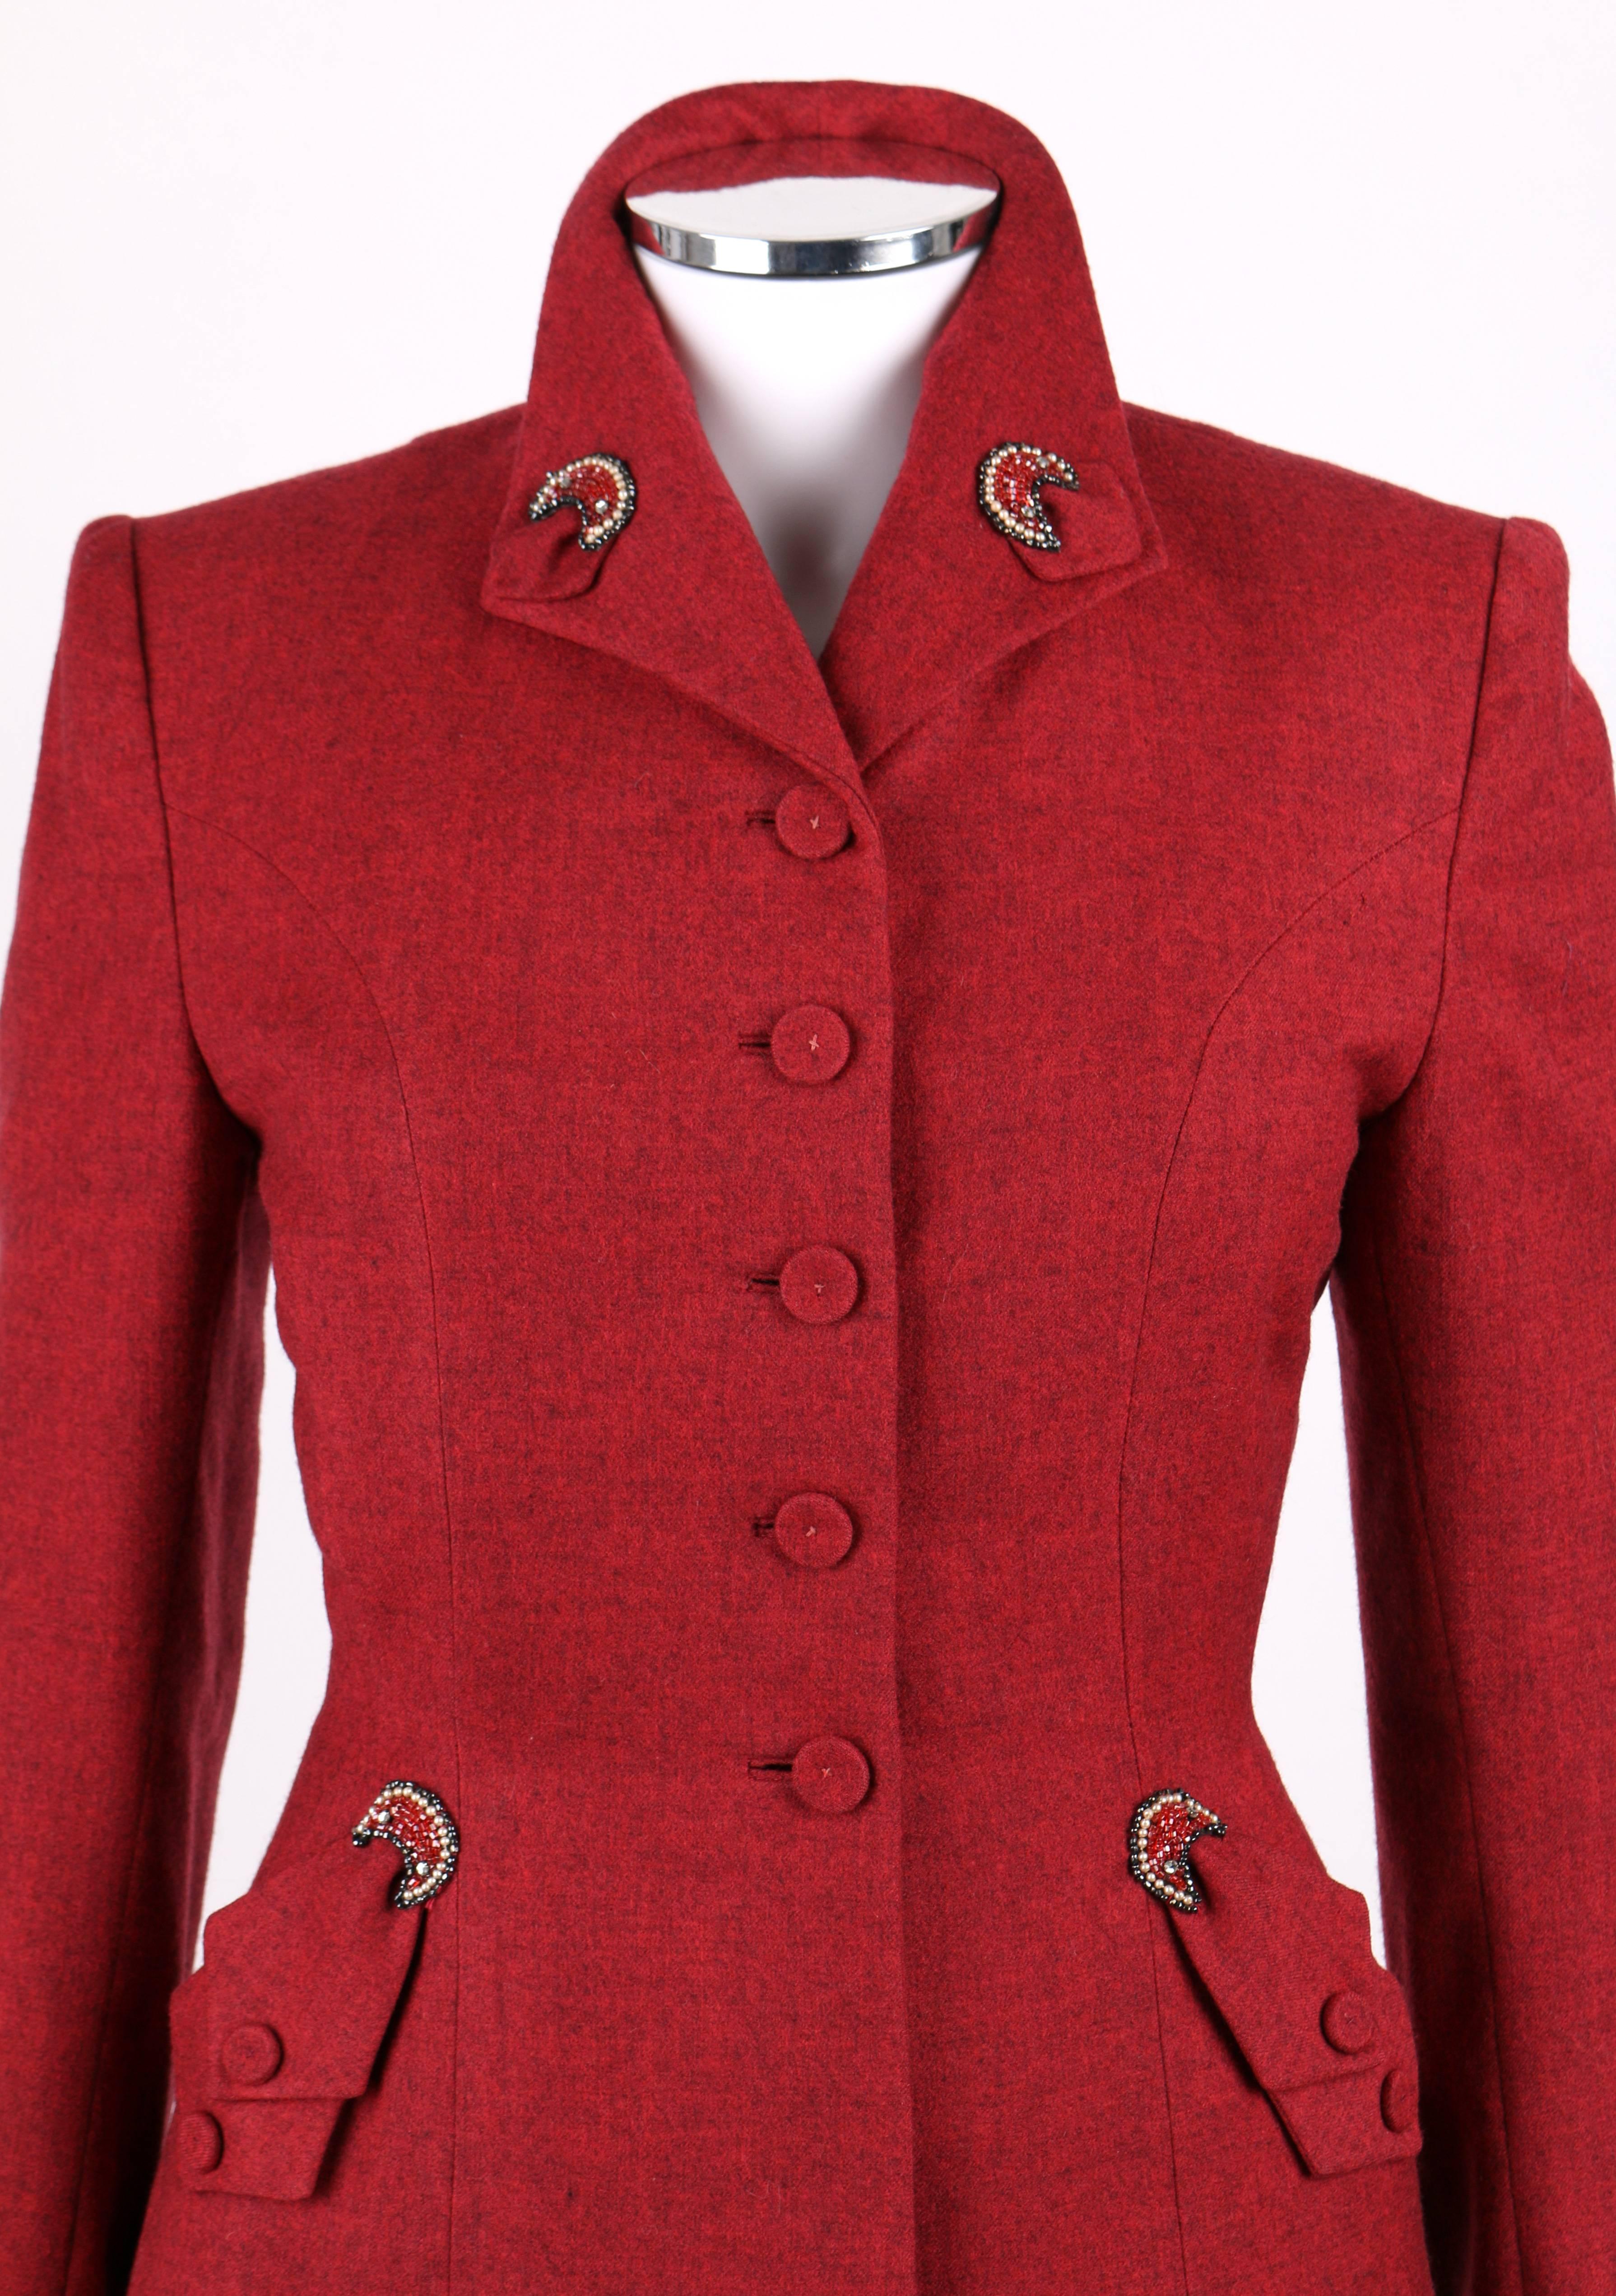 Women's STYLED BY VENNE c.1940's 2 Piece Ruby Red Wool Embellished Blazer Skirt Suit